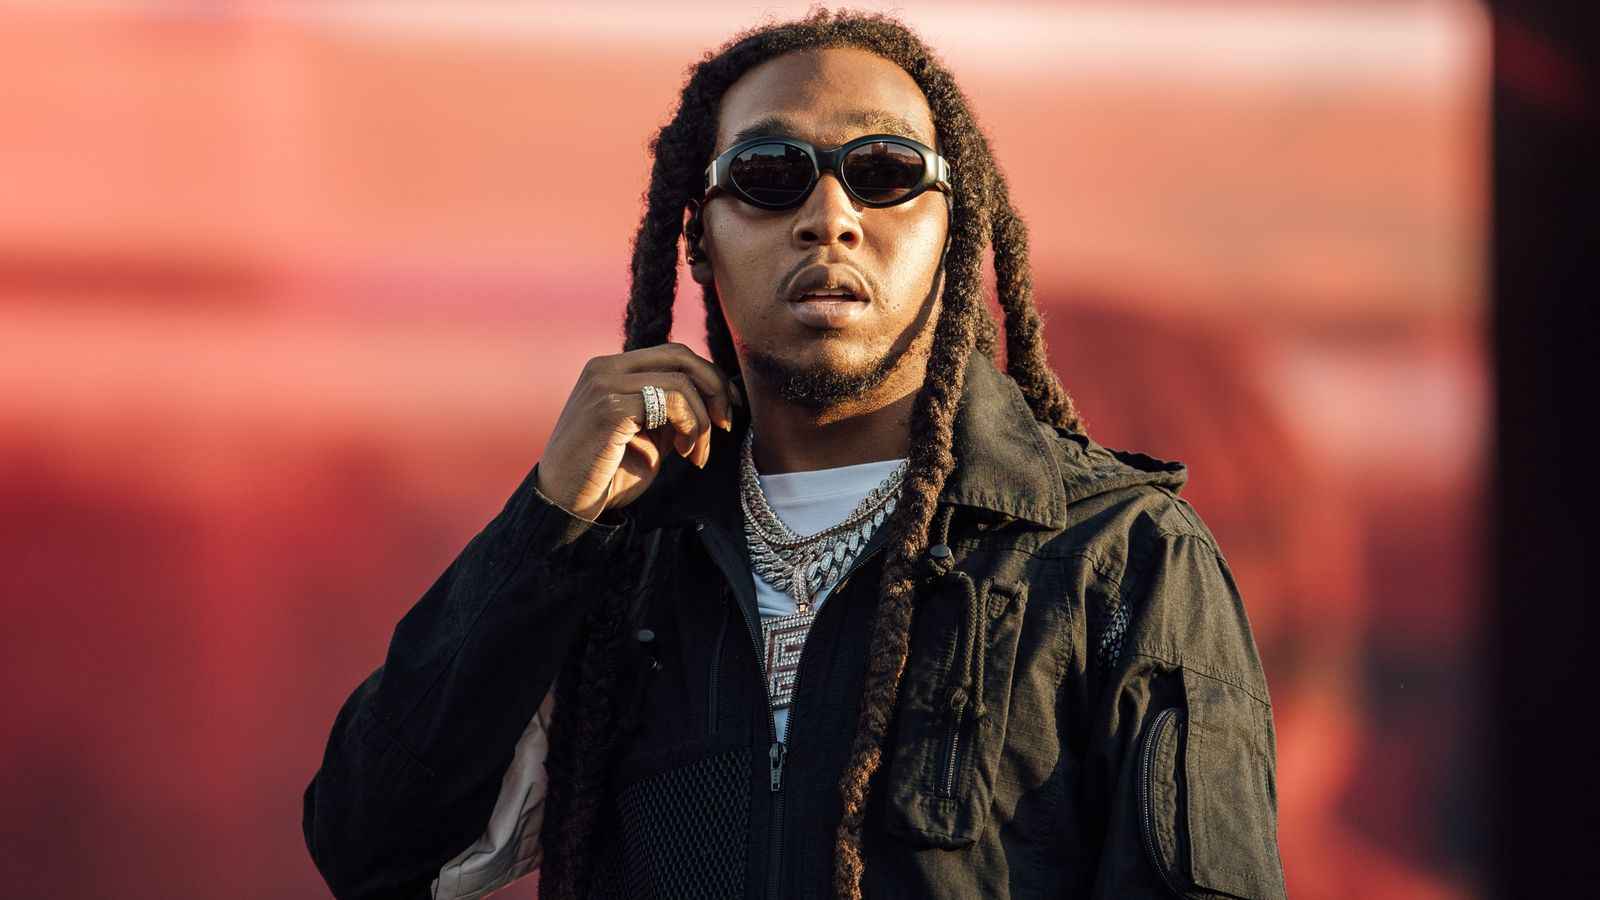 Takeoff Biography: Age, Height, Birthday, Family, Net Worth